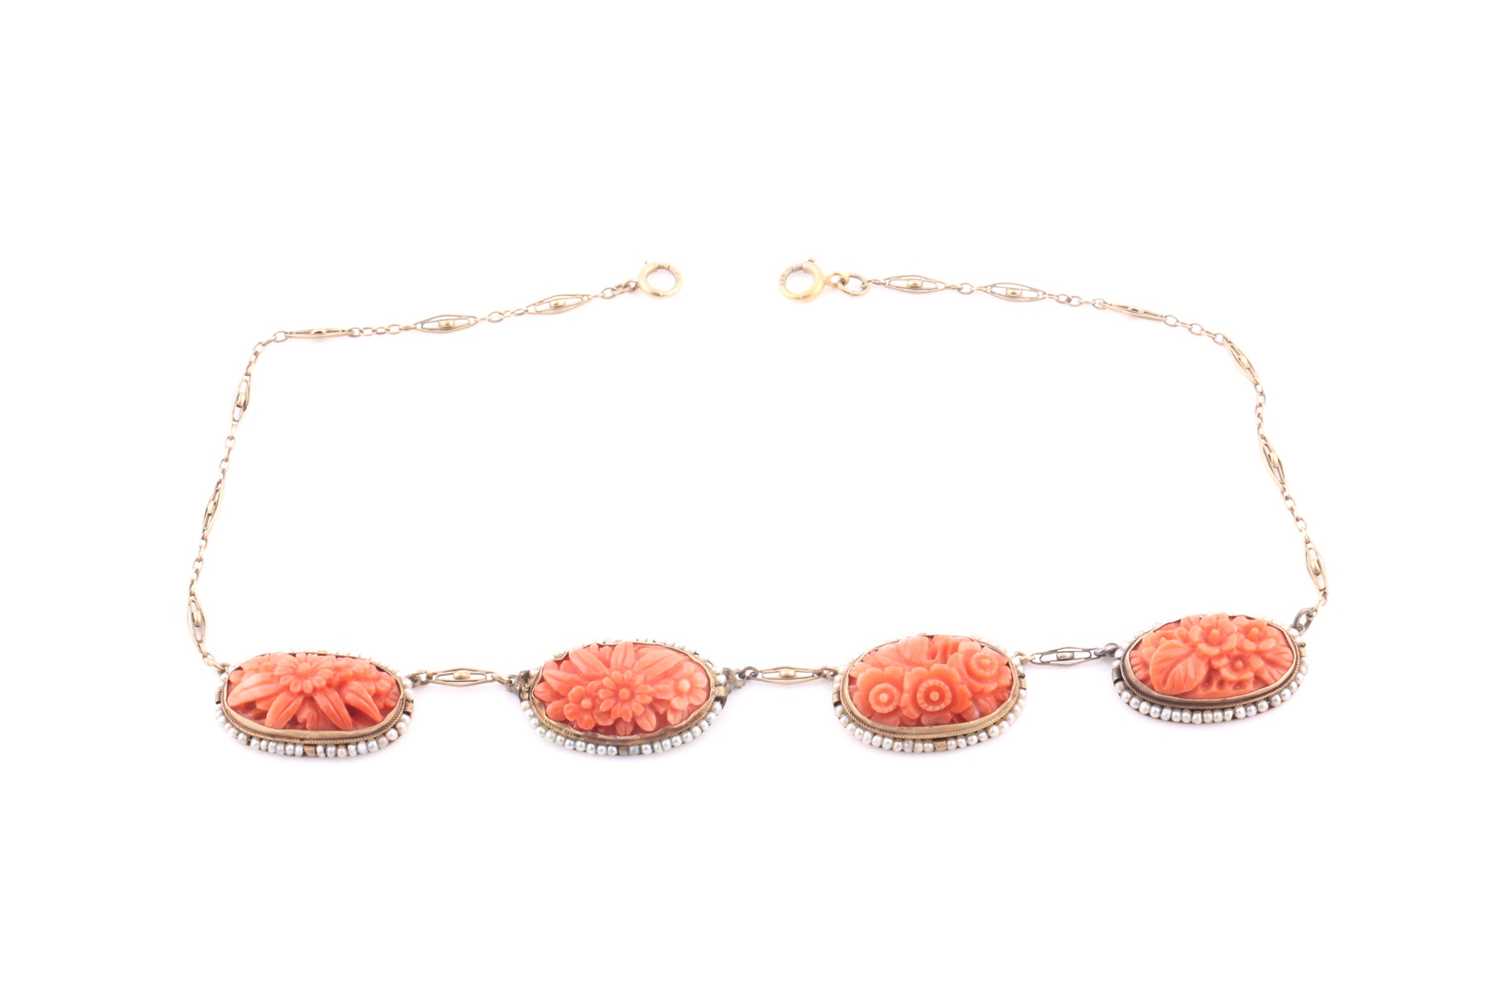 A late 19th / early 20th century coral and seed pearl necklace, set with four carved coral